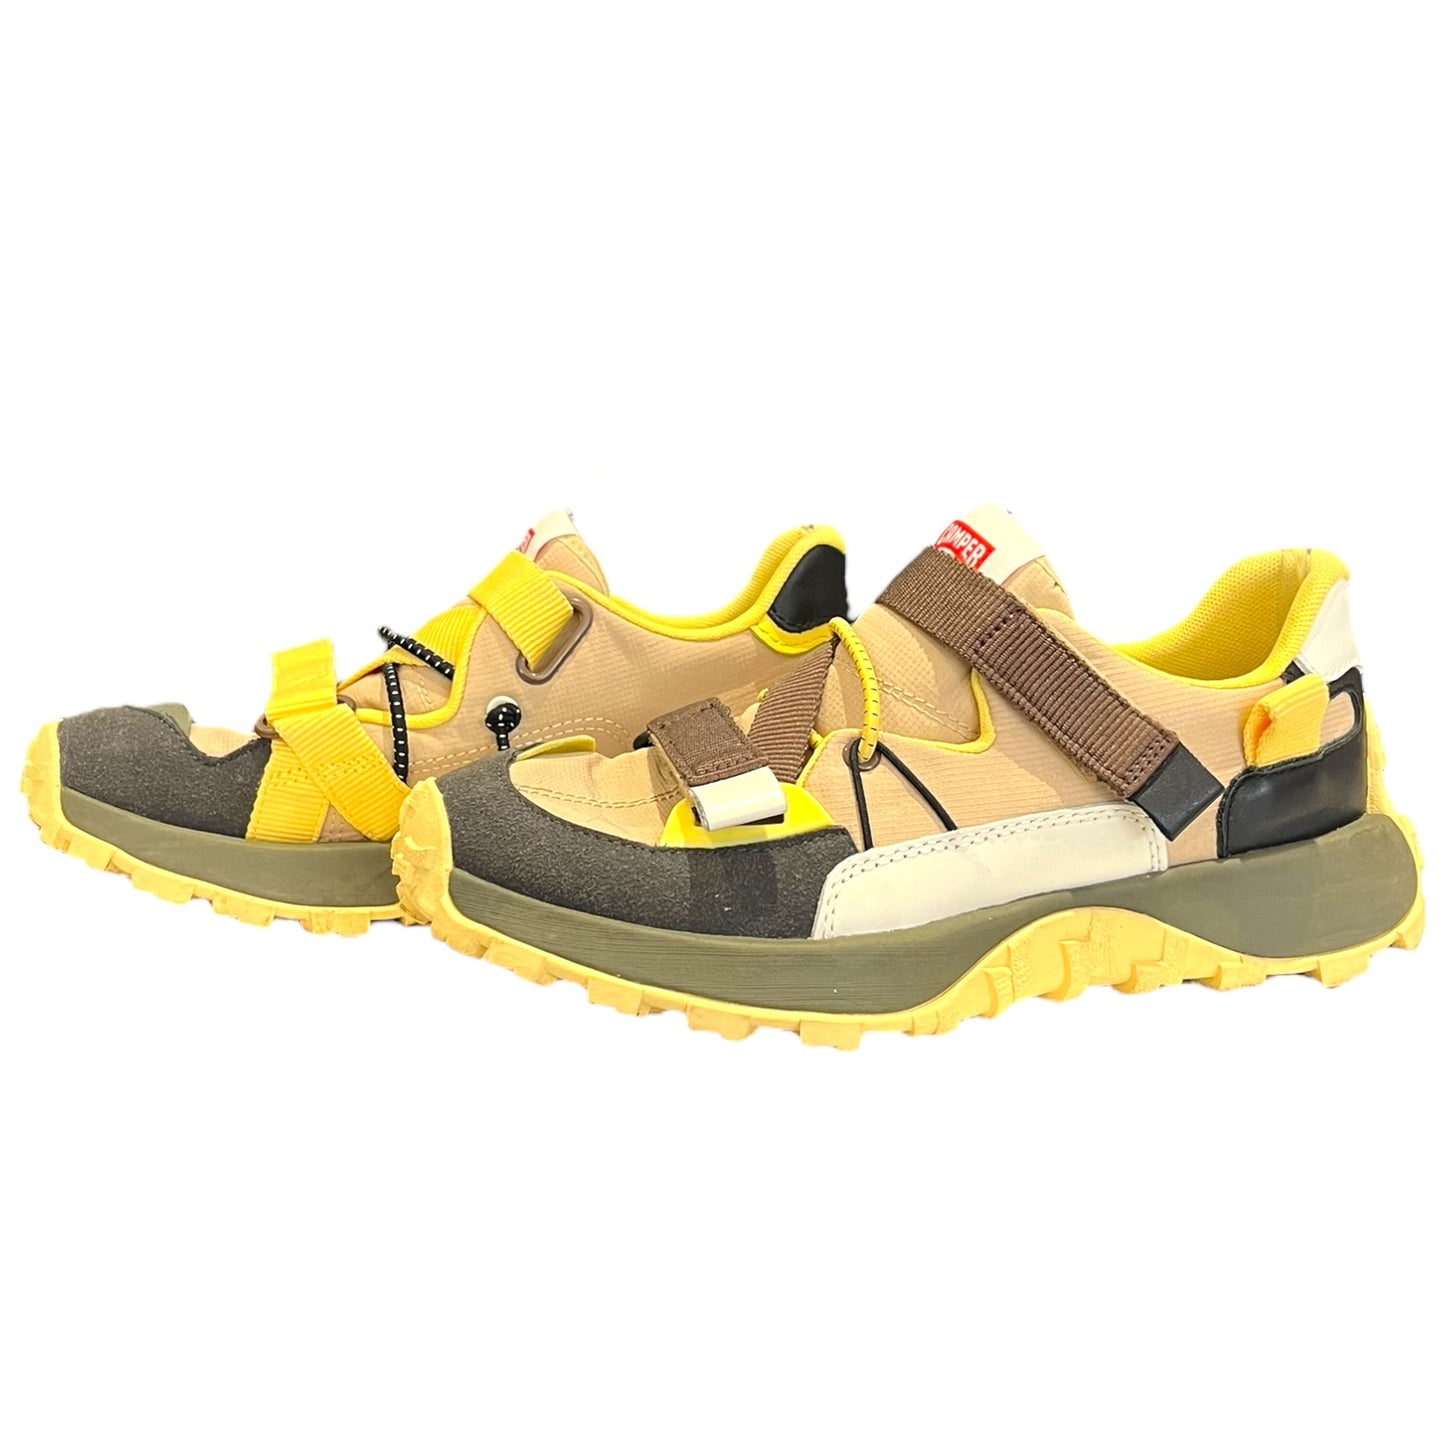 Camper Yellow and Khaki Trainers - 6